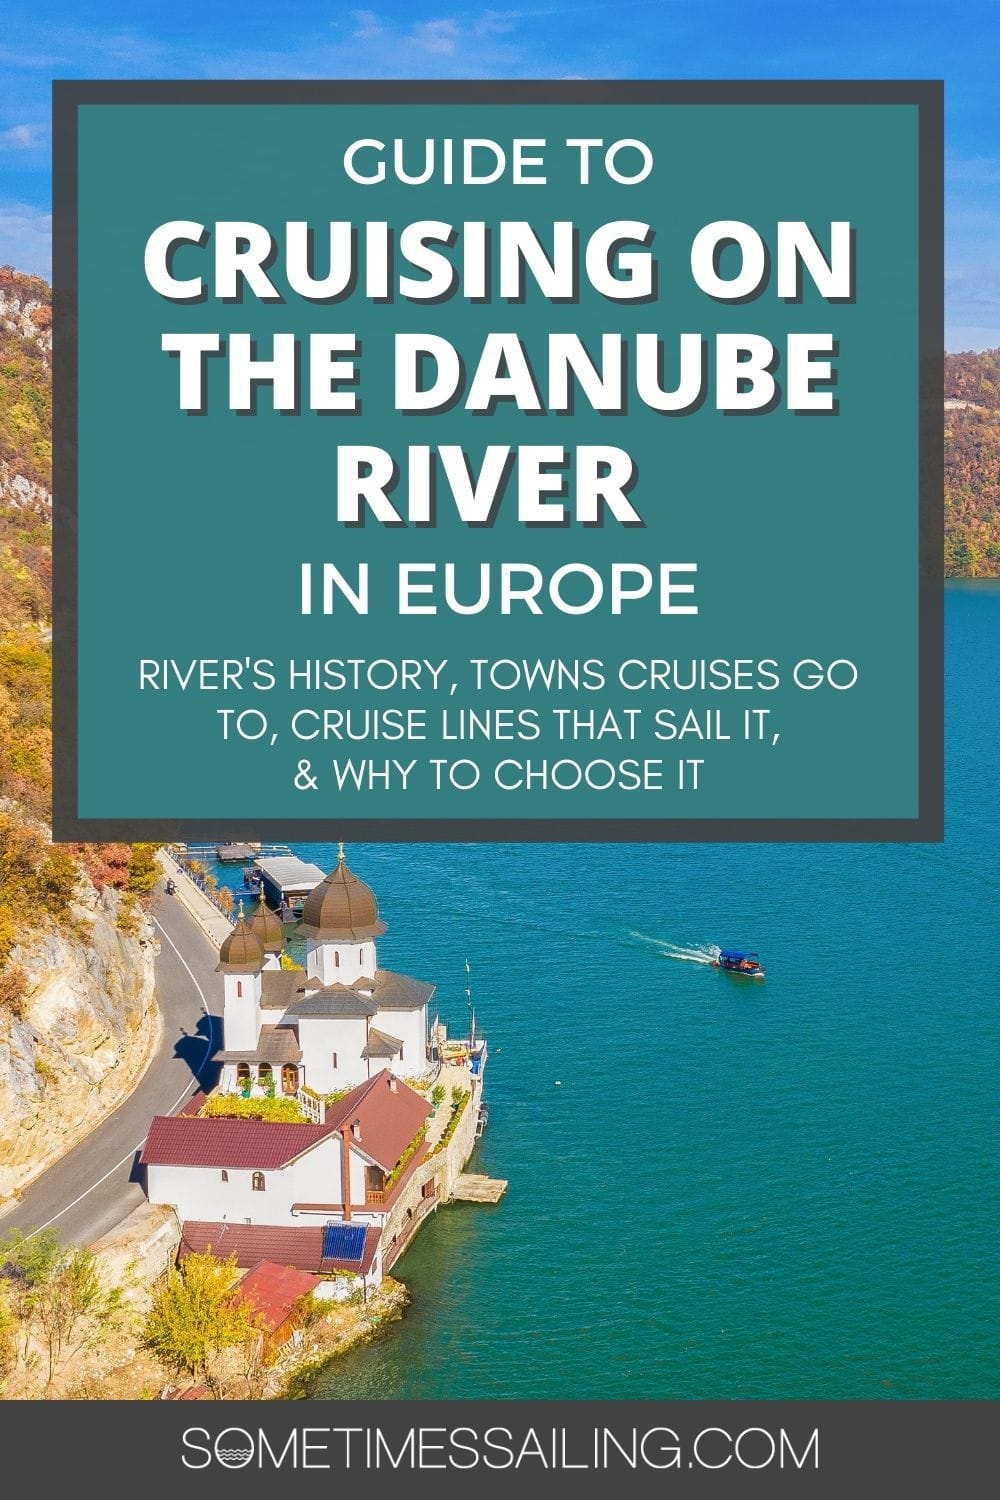 Guide to Cruising the Danube River in Europe with a picture of the blue river behind it with a building on the left.